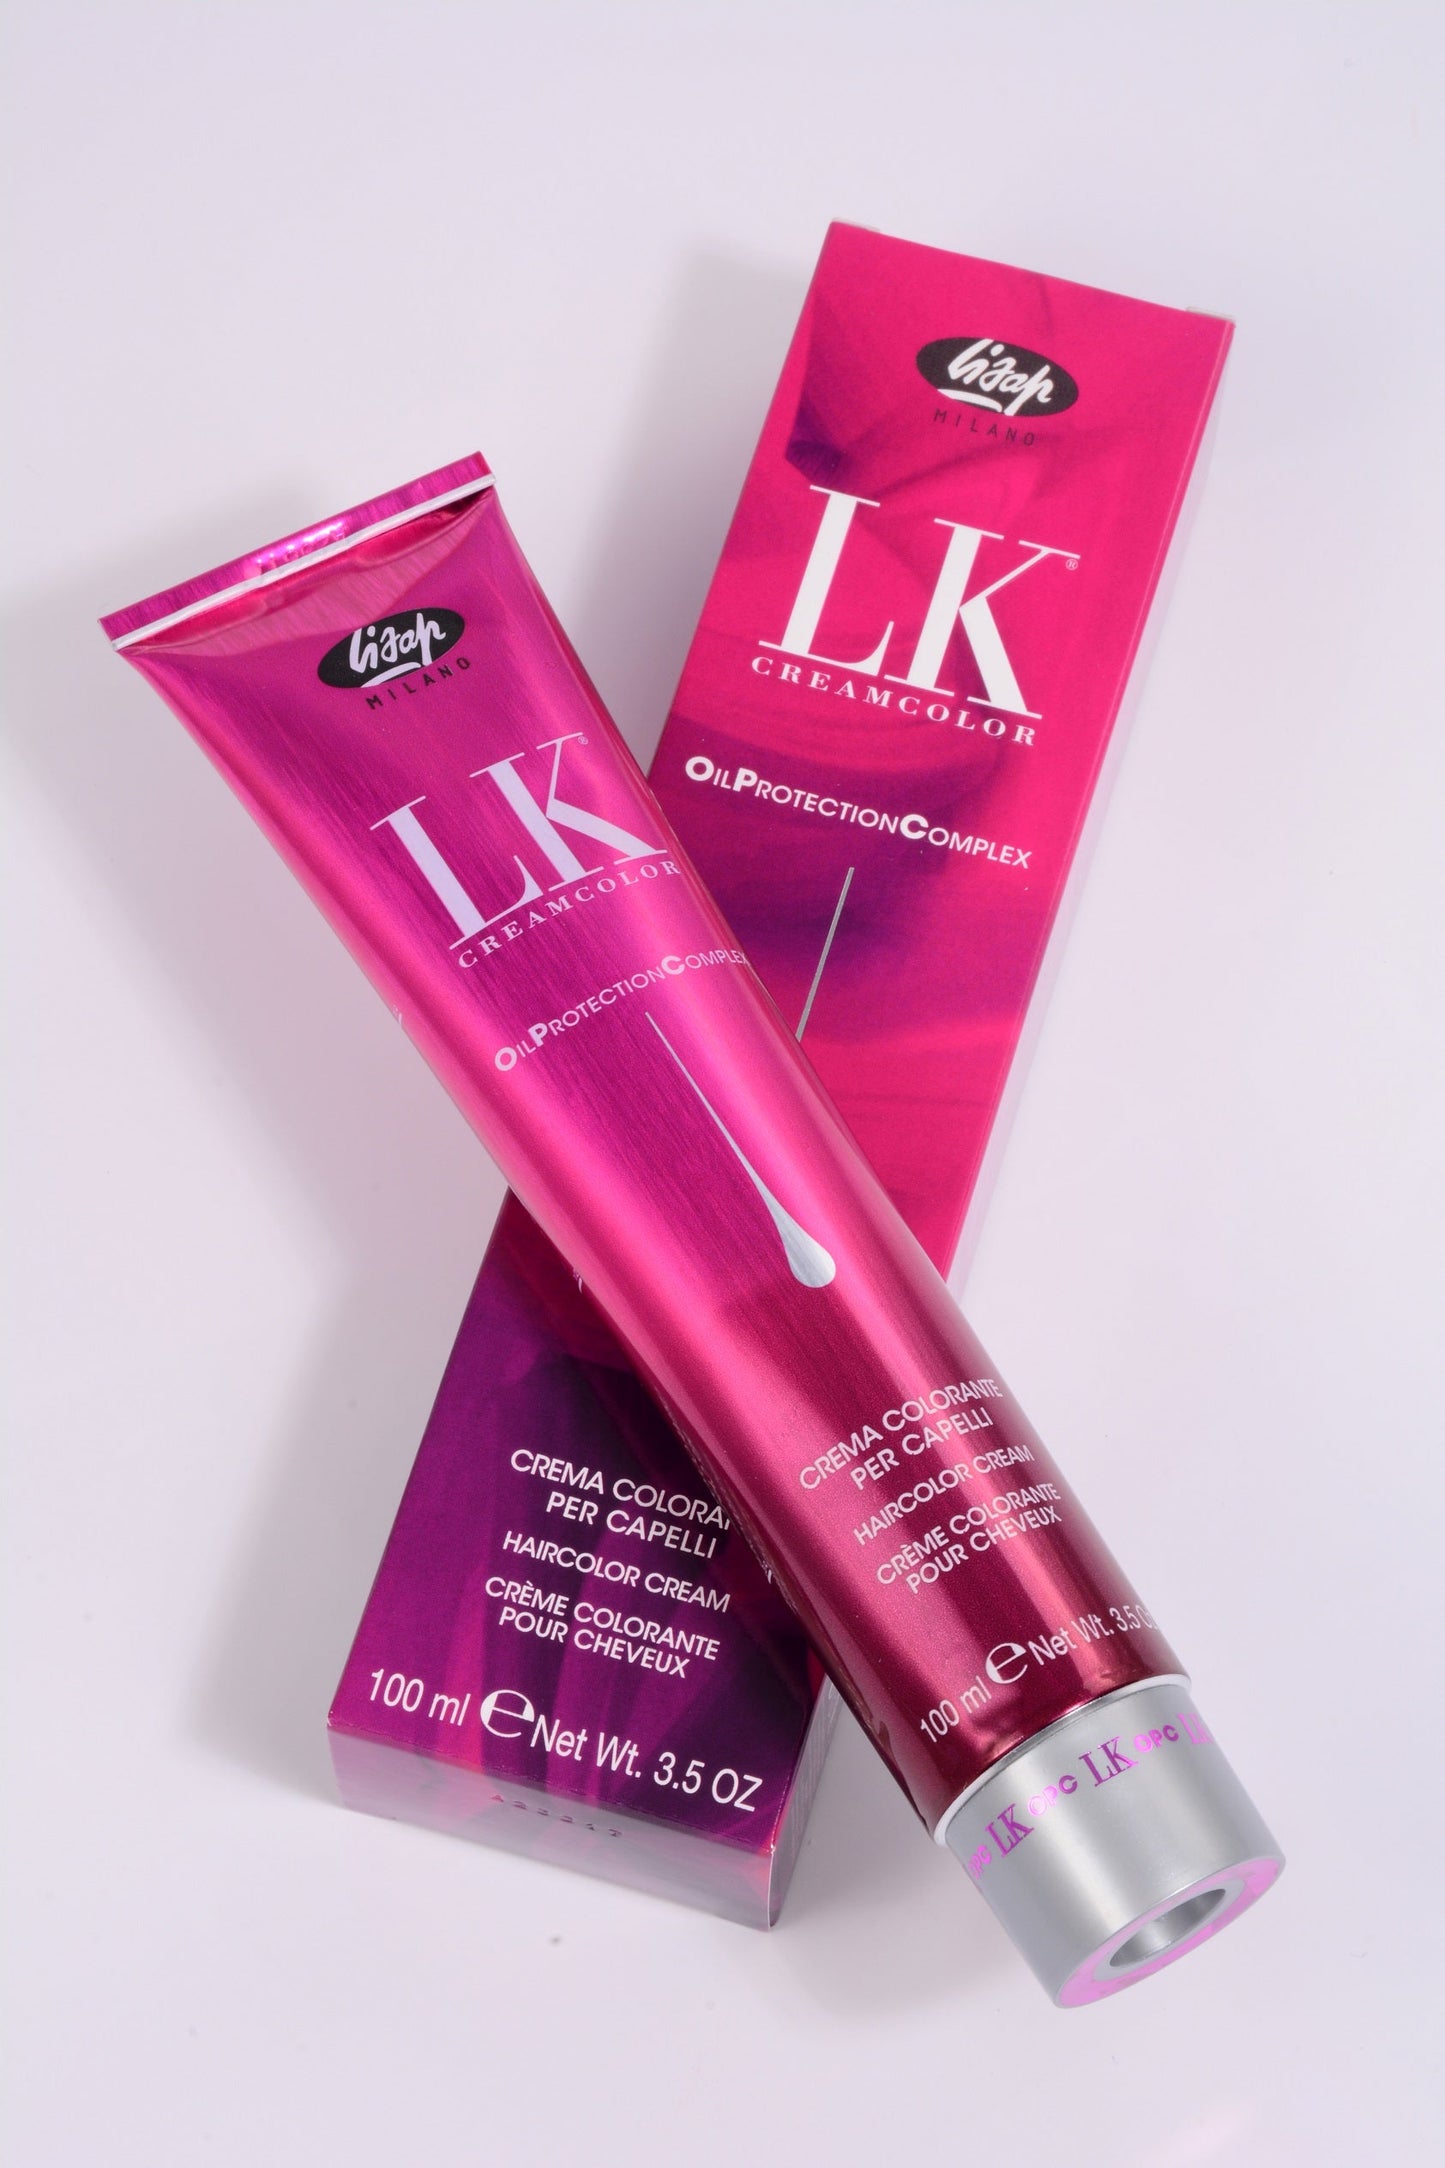 LK Creamcolor 11/82 Oil Protection Complex